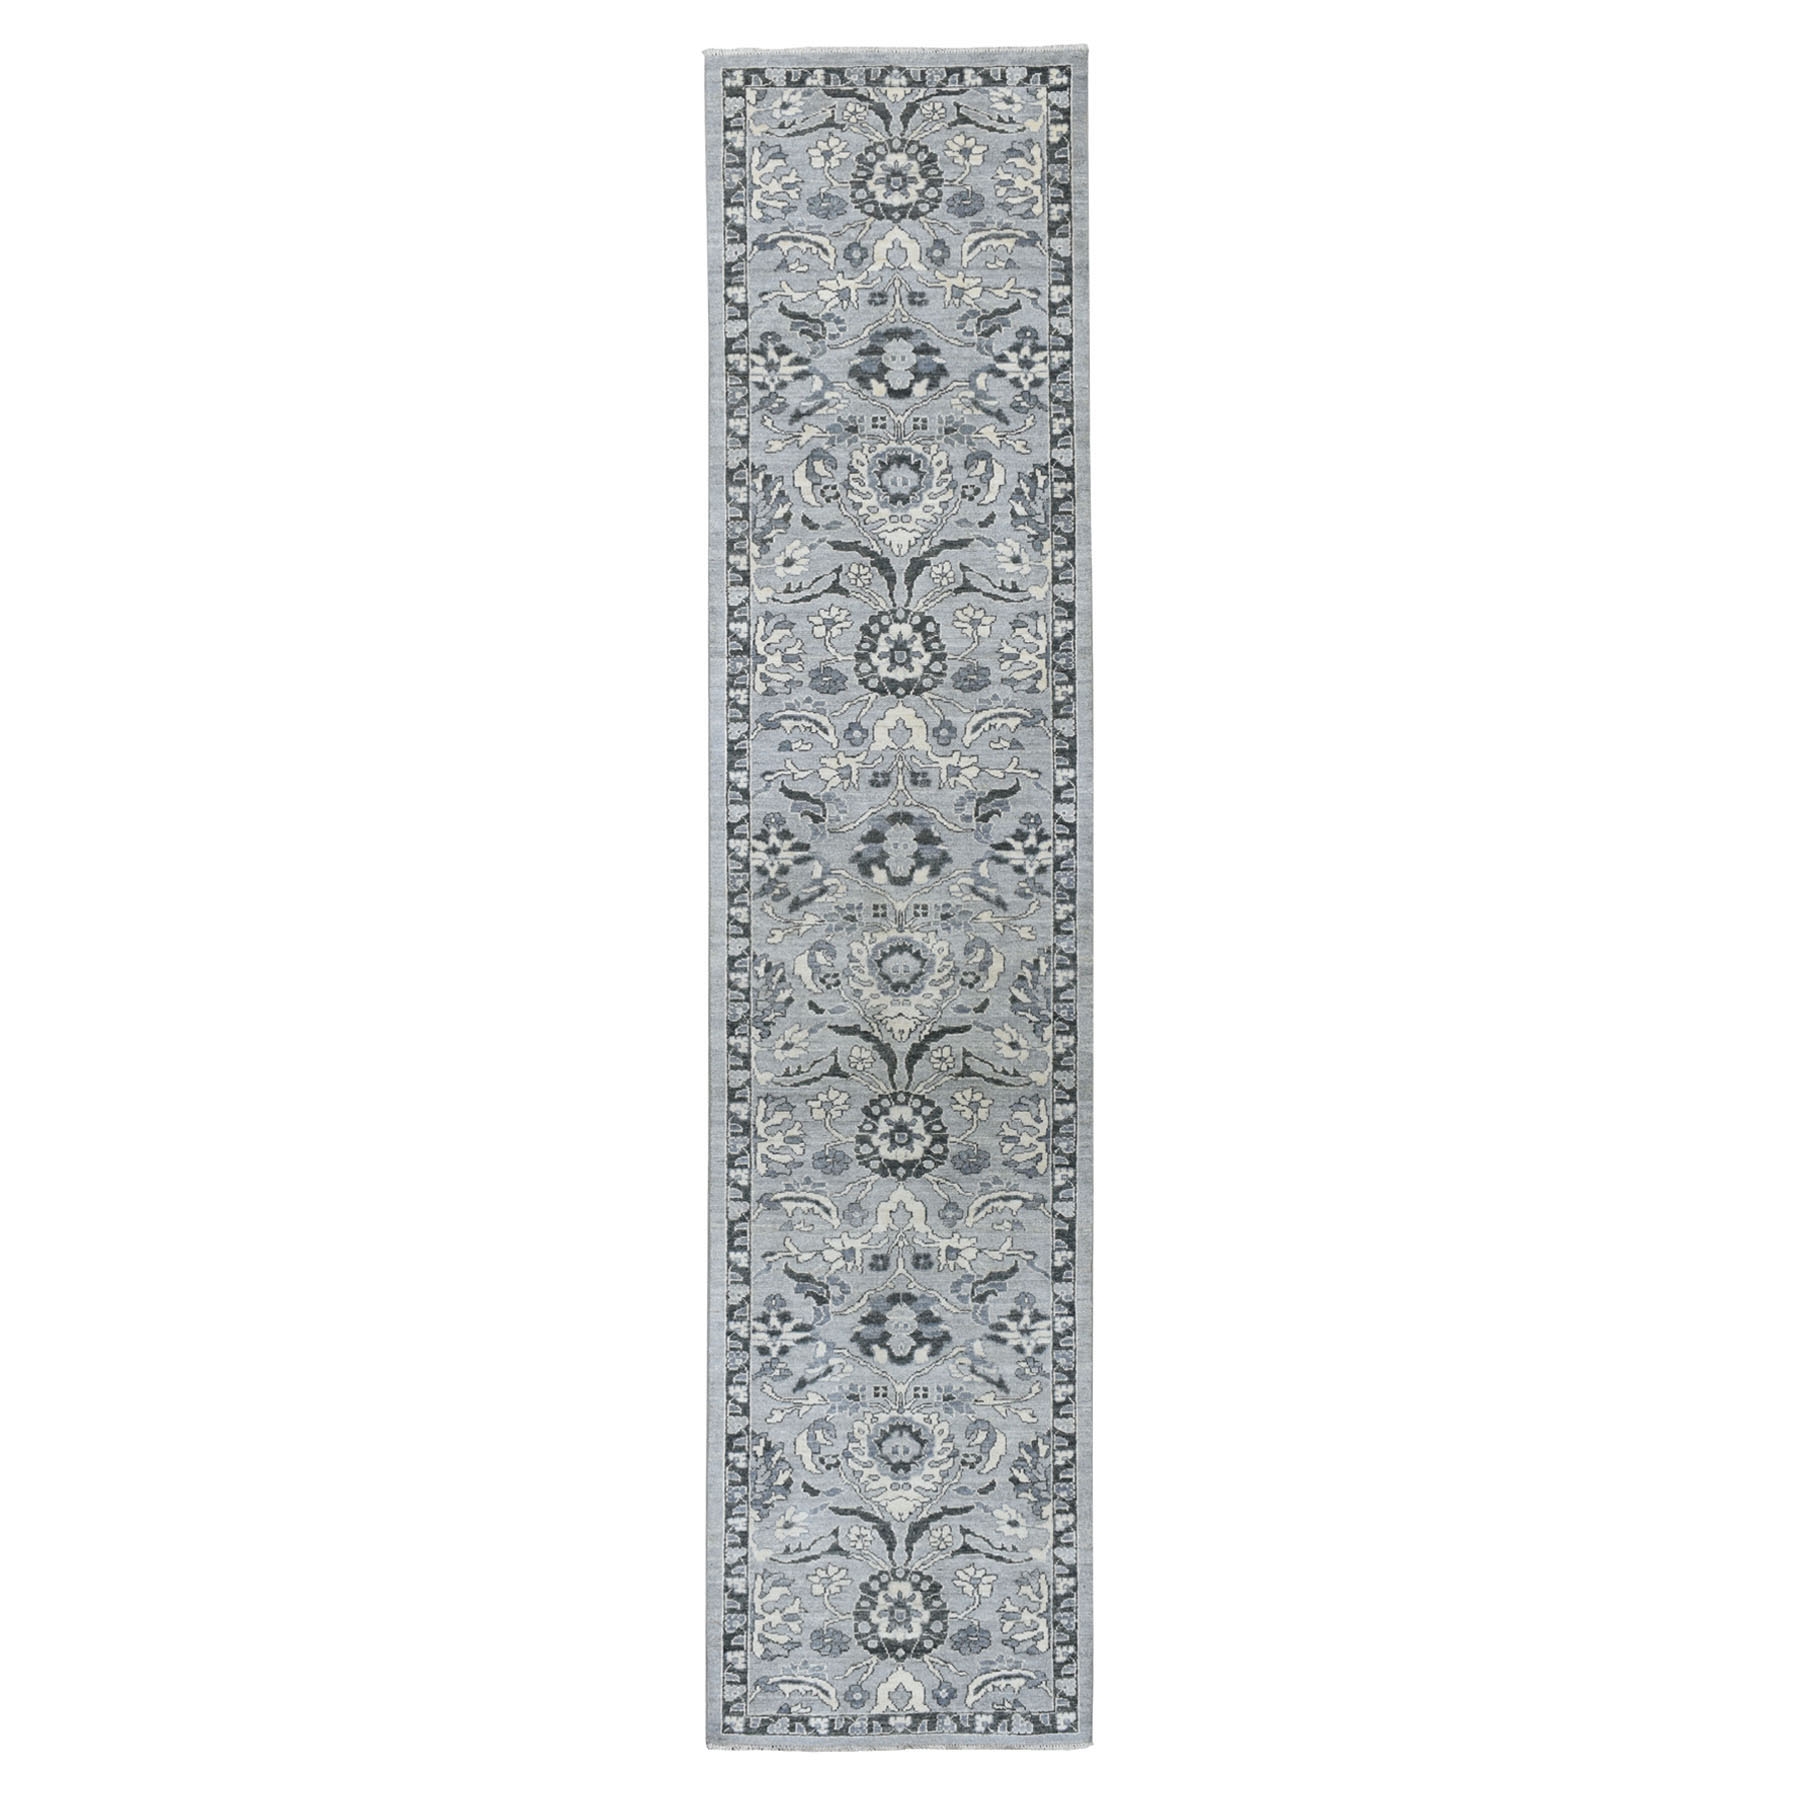 2'7"X11'7" Undyed Natural Wool Mahal Design Runner Hand Knotted Oriental Rug moaeaded